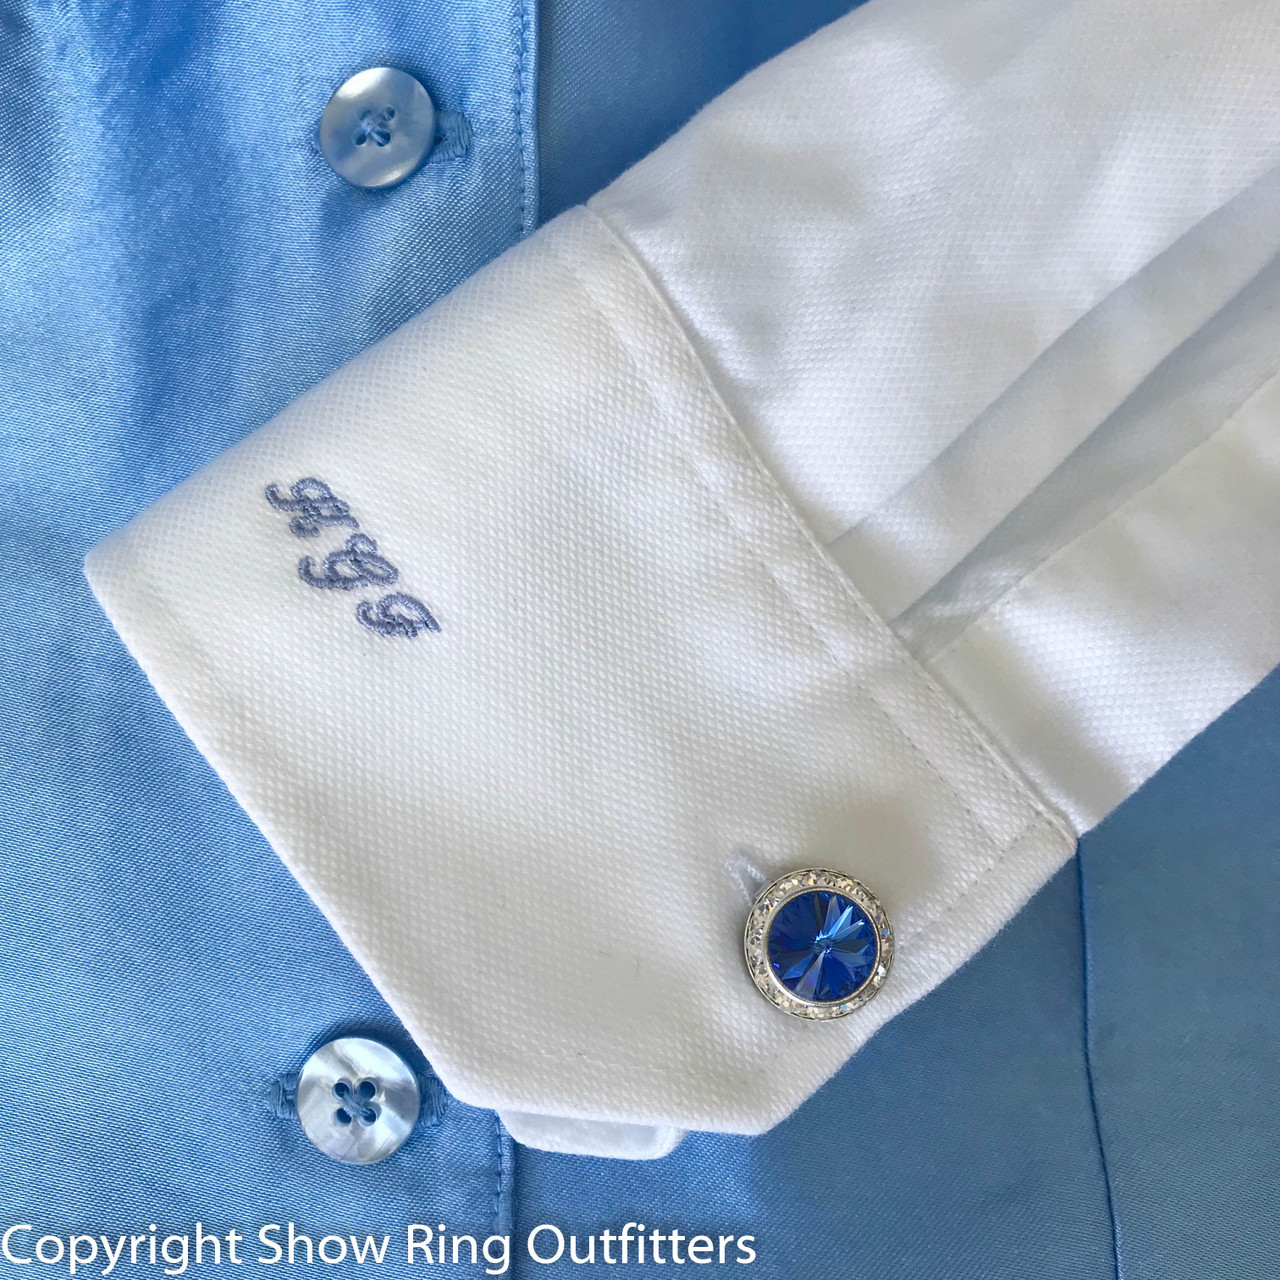 Shirt Cuff Button Covers, 25 colors, set of 2 (Faux Cufflinks